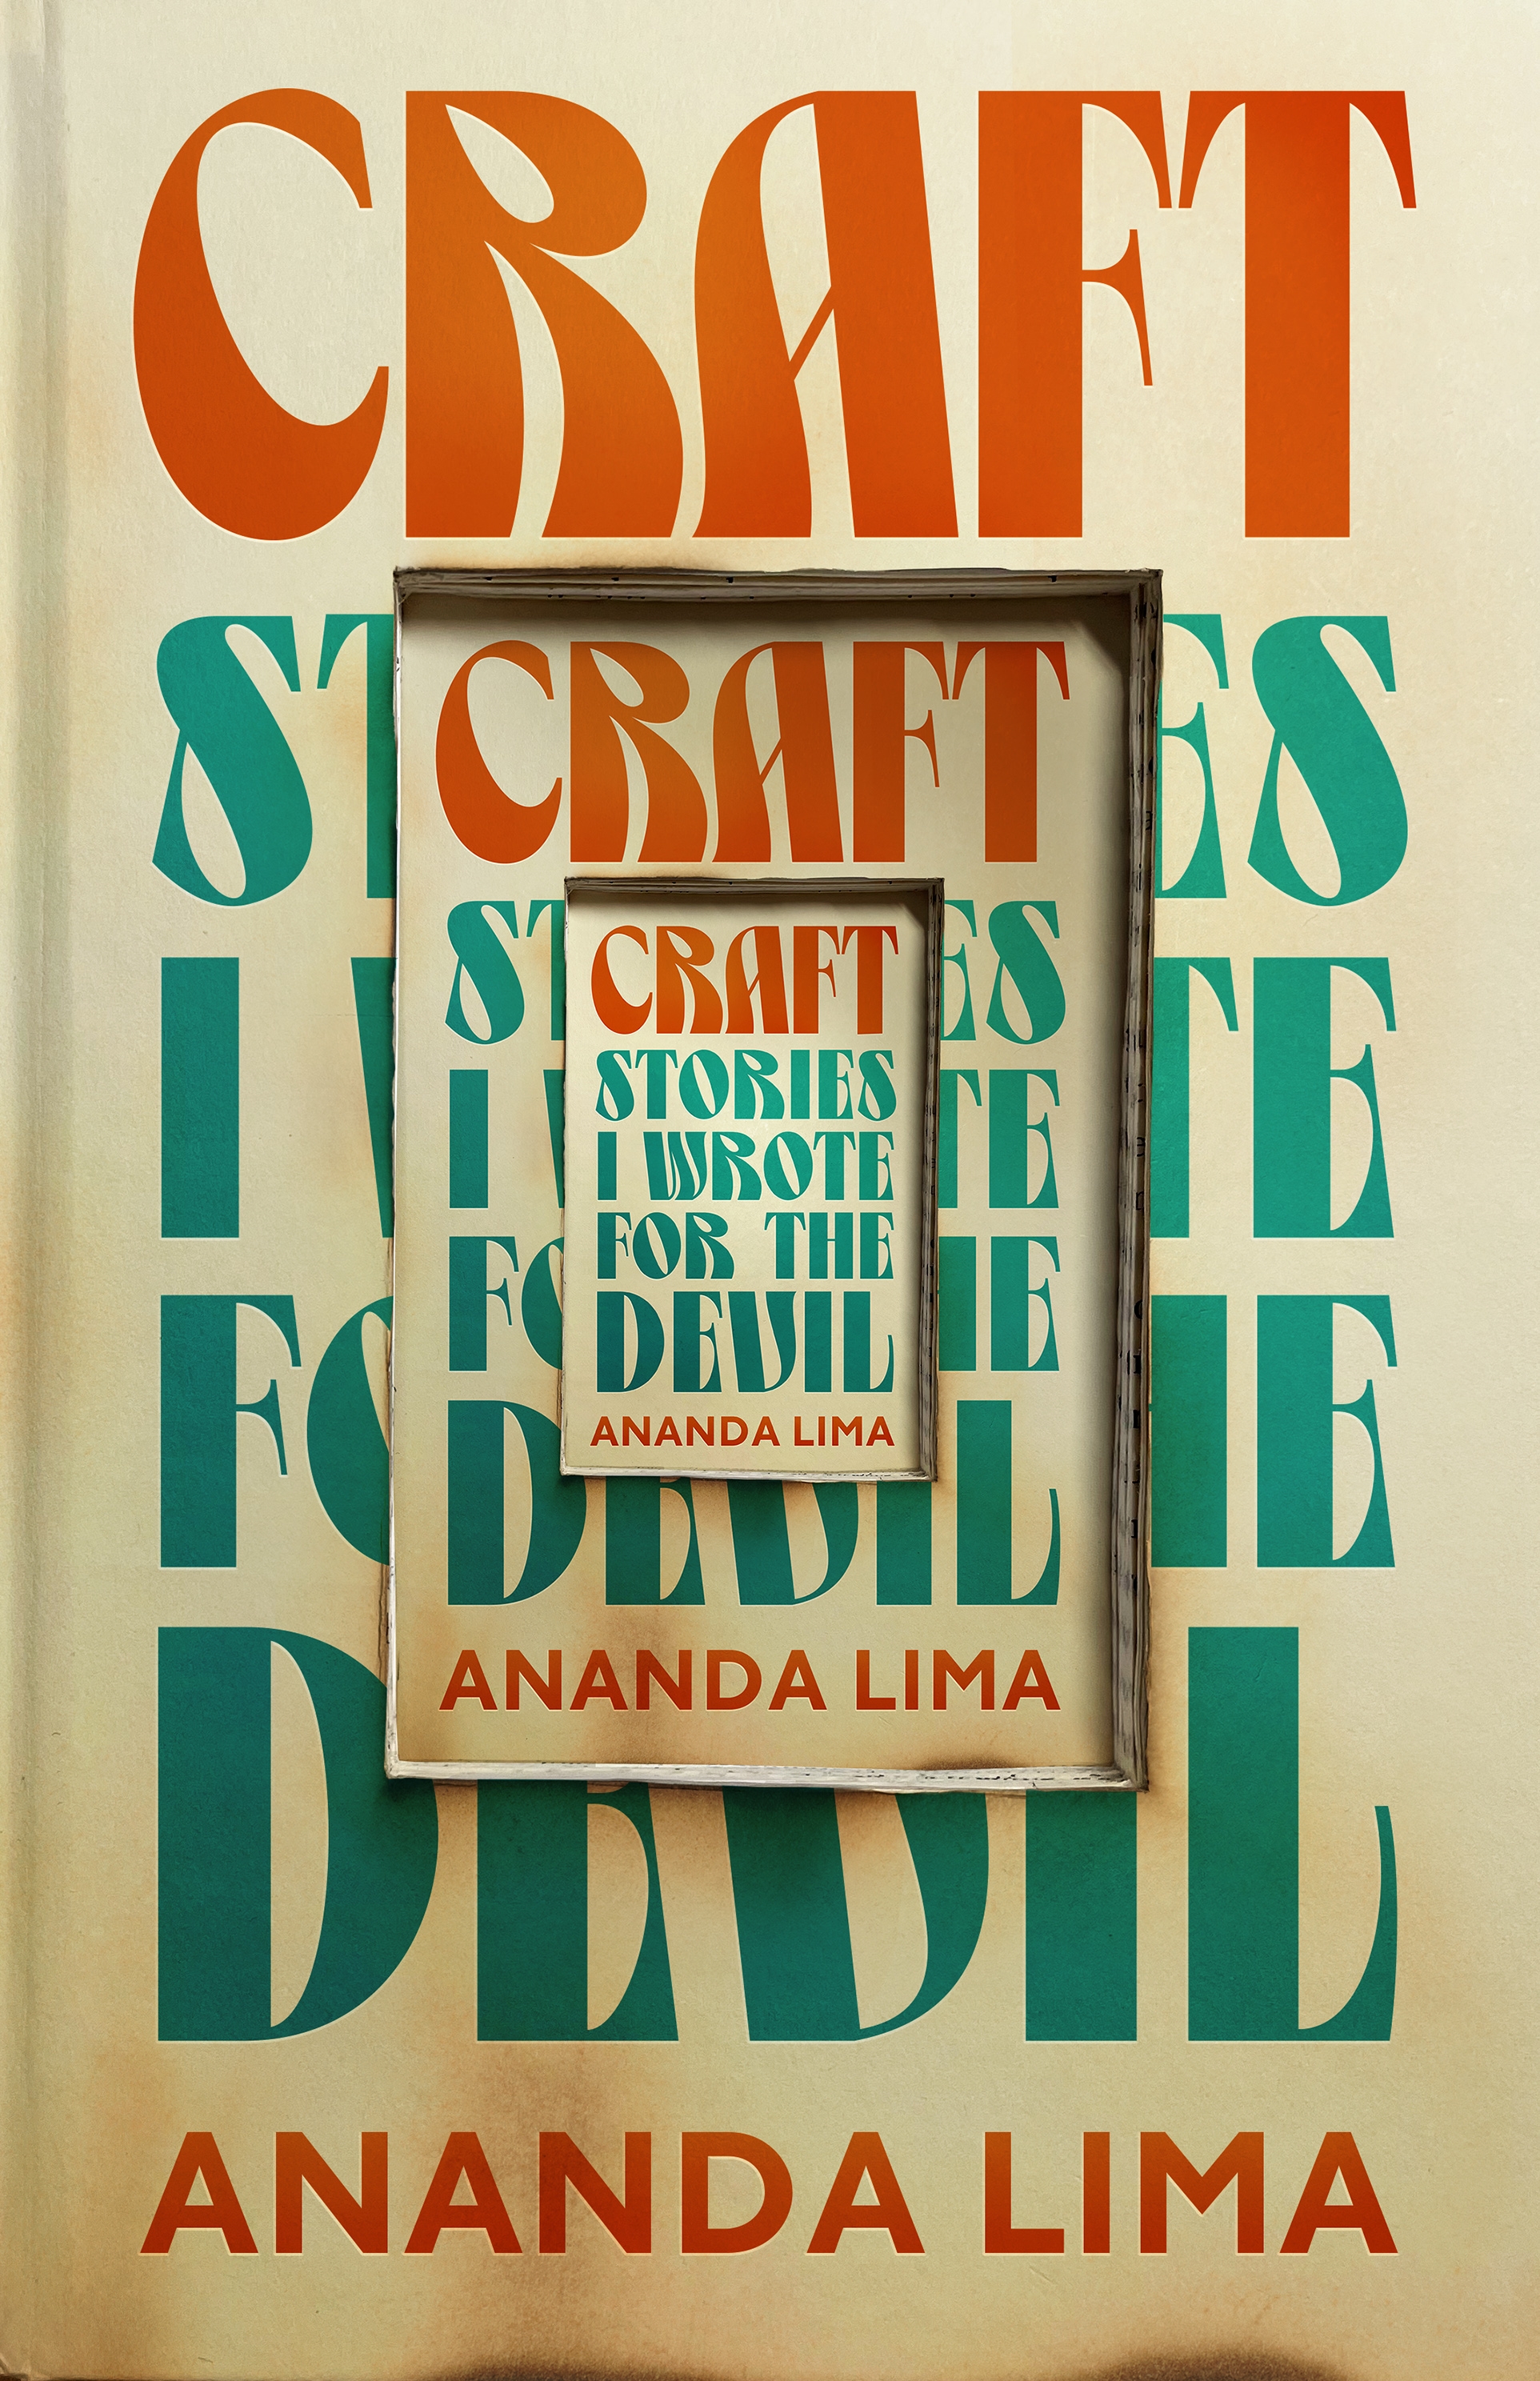 Craft : Stories I Wrote for the Devil by Ananda Lima